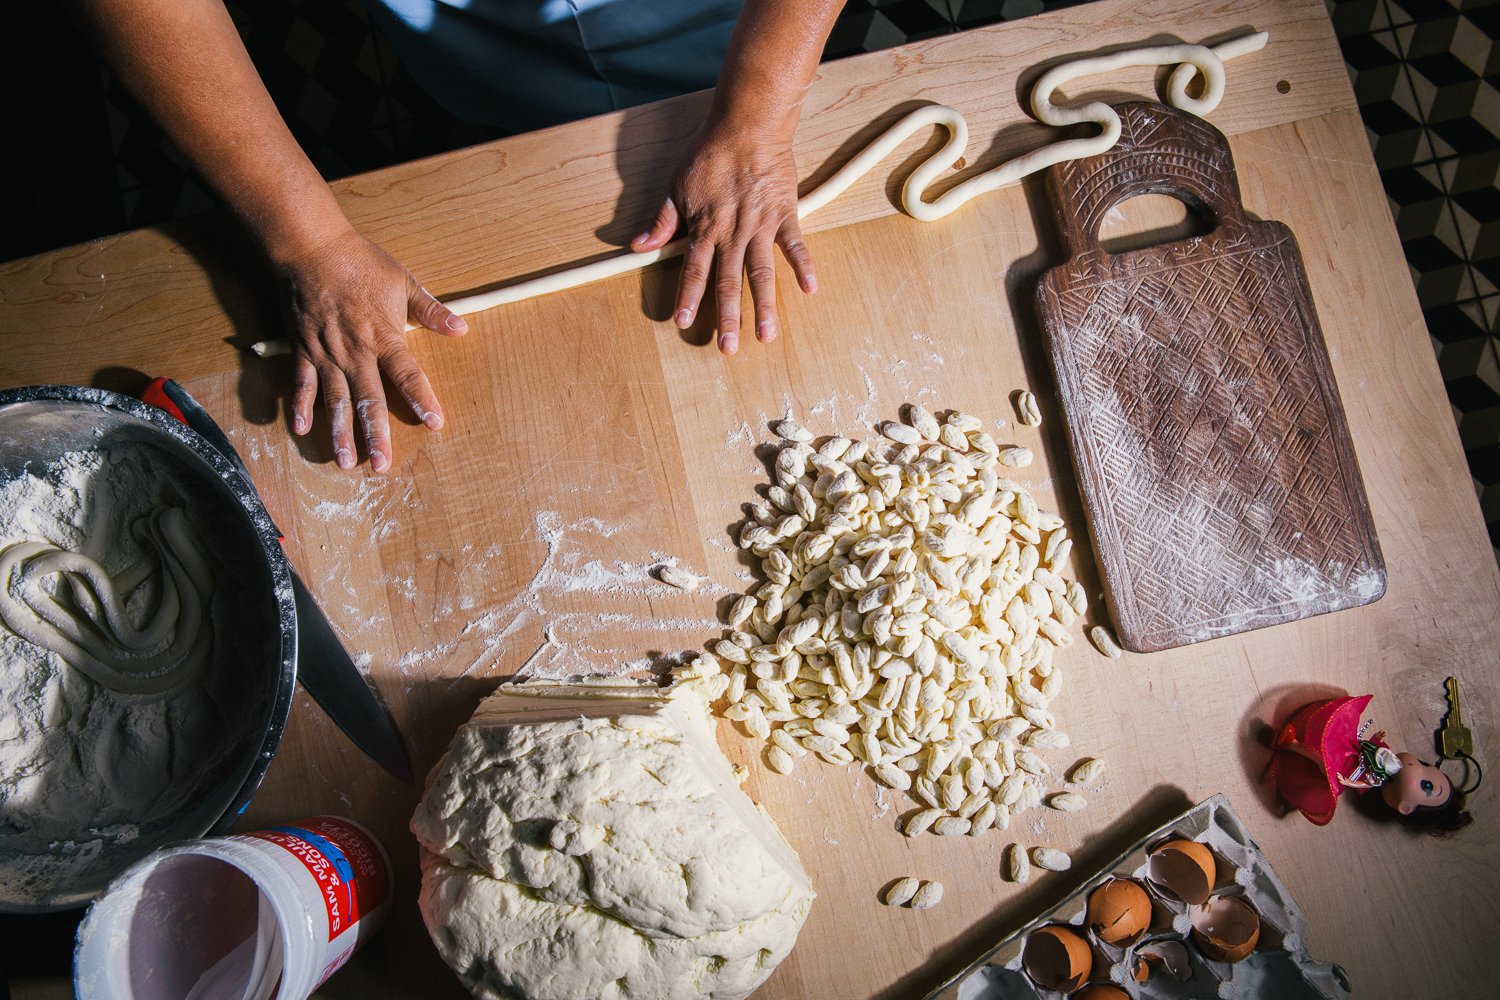 Pasta is rolled and cut on a wooden table in this photo by Lauren V. Allen